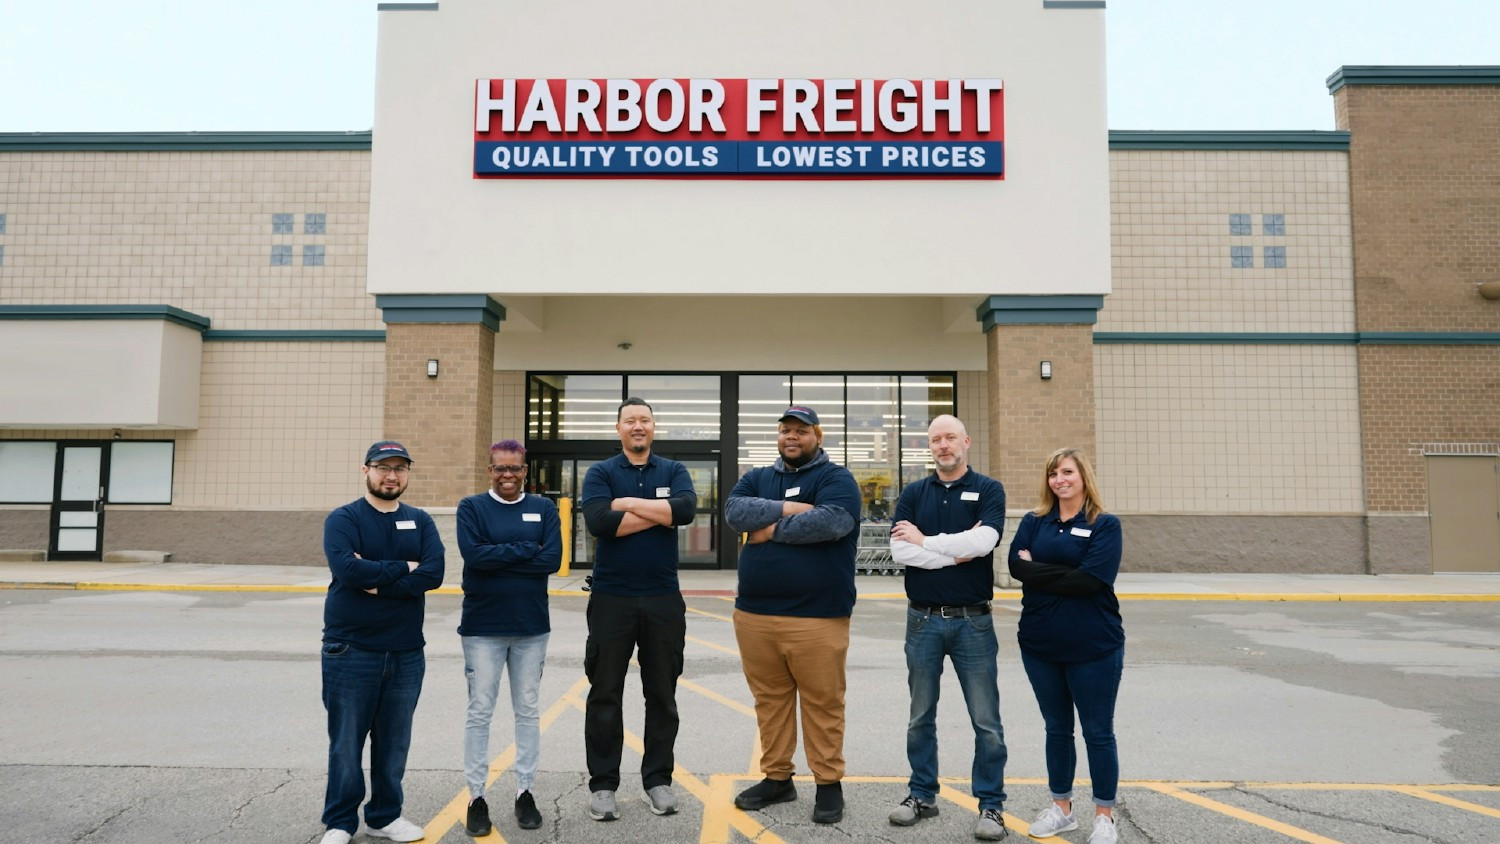 We value people above all else. We like to say it’s not what makes Harbor Freight great, but who.